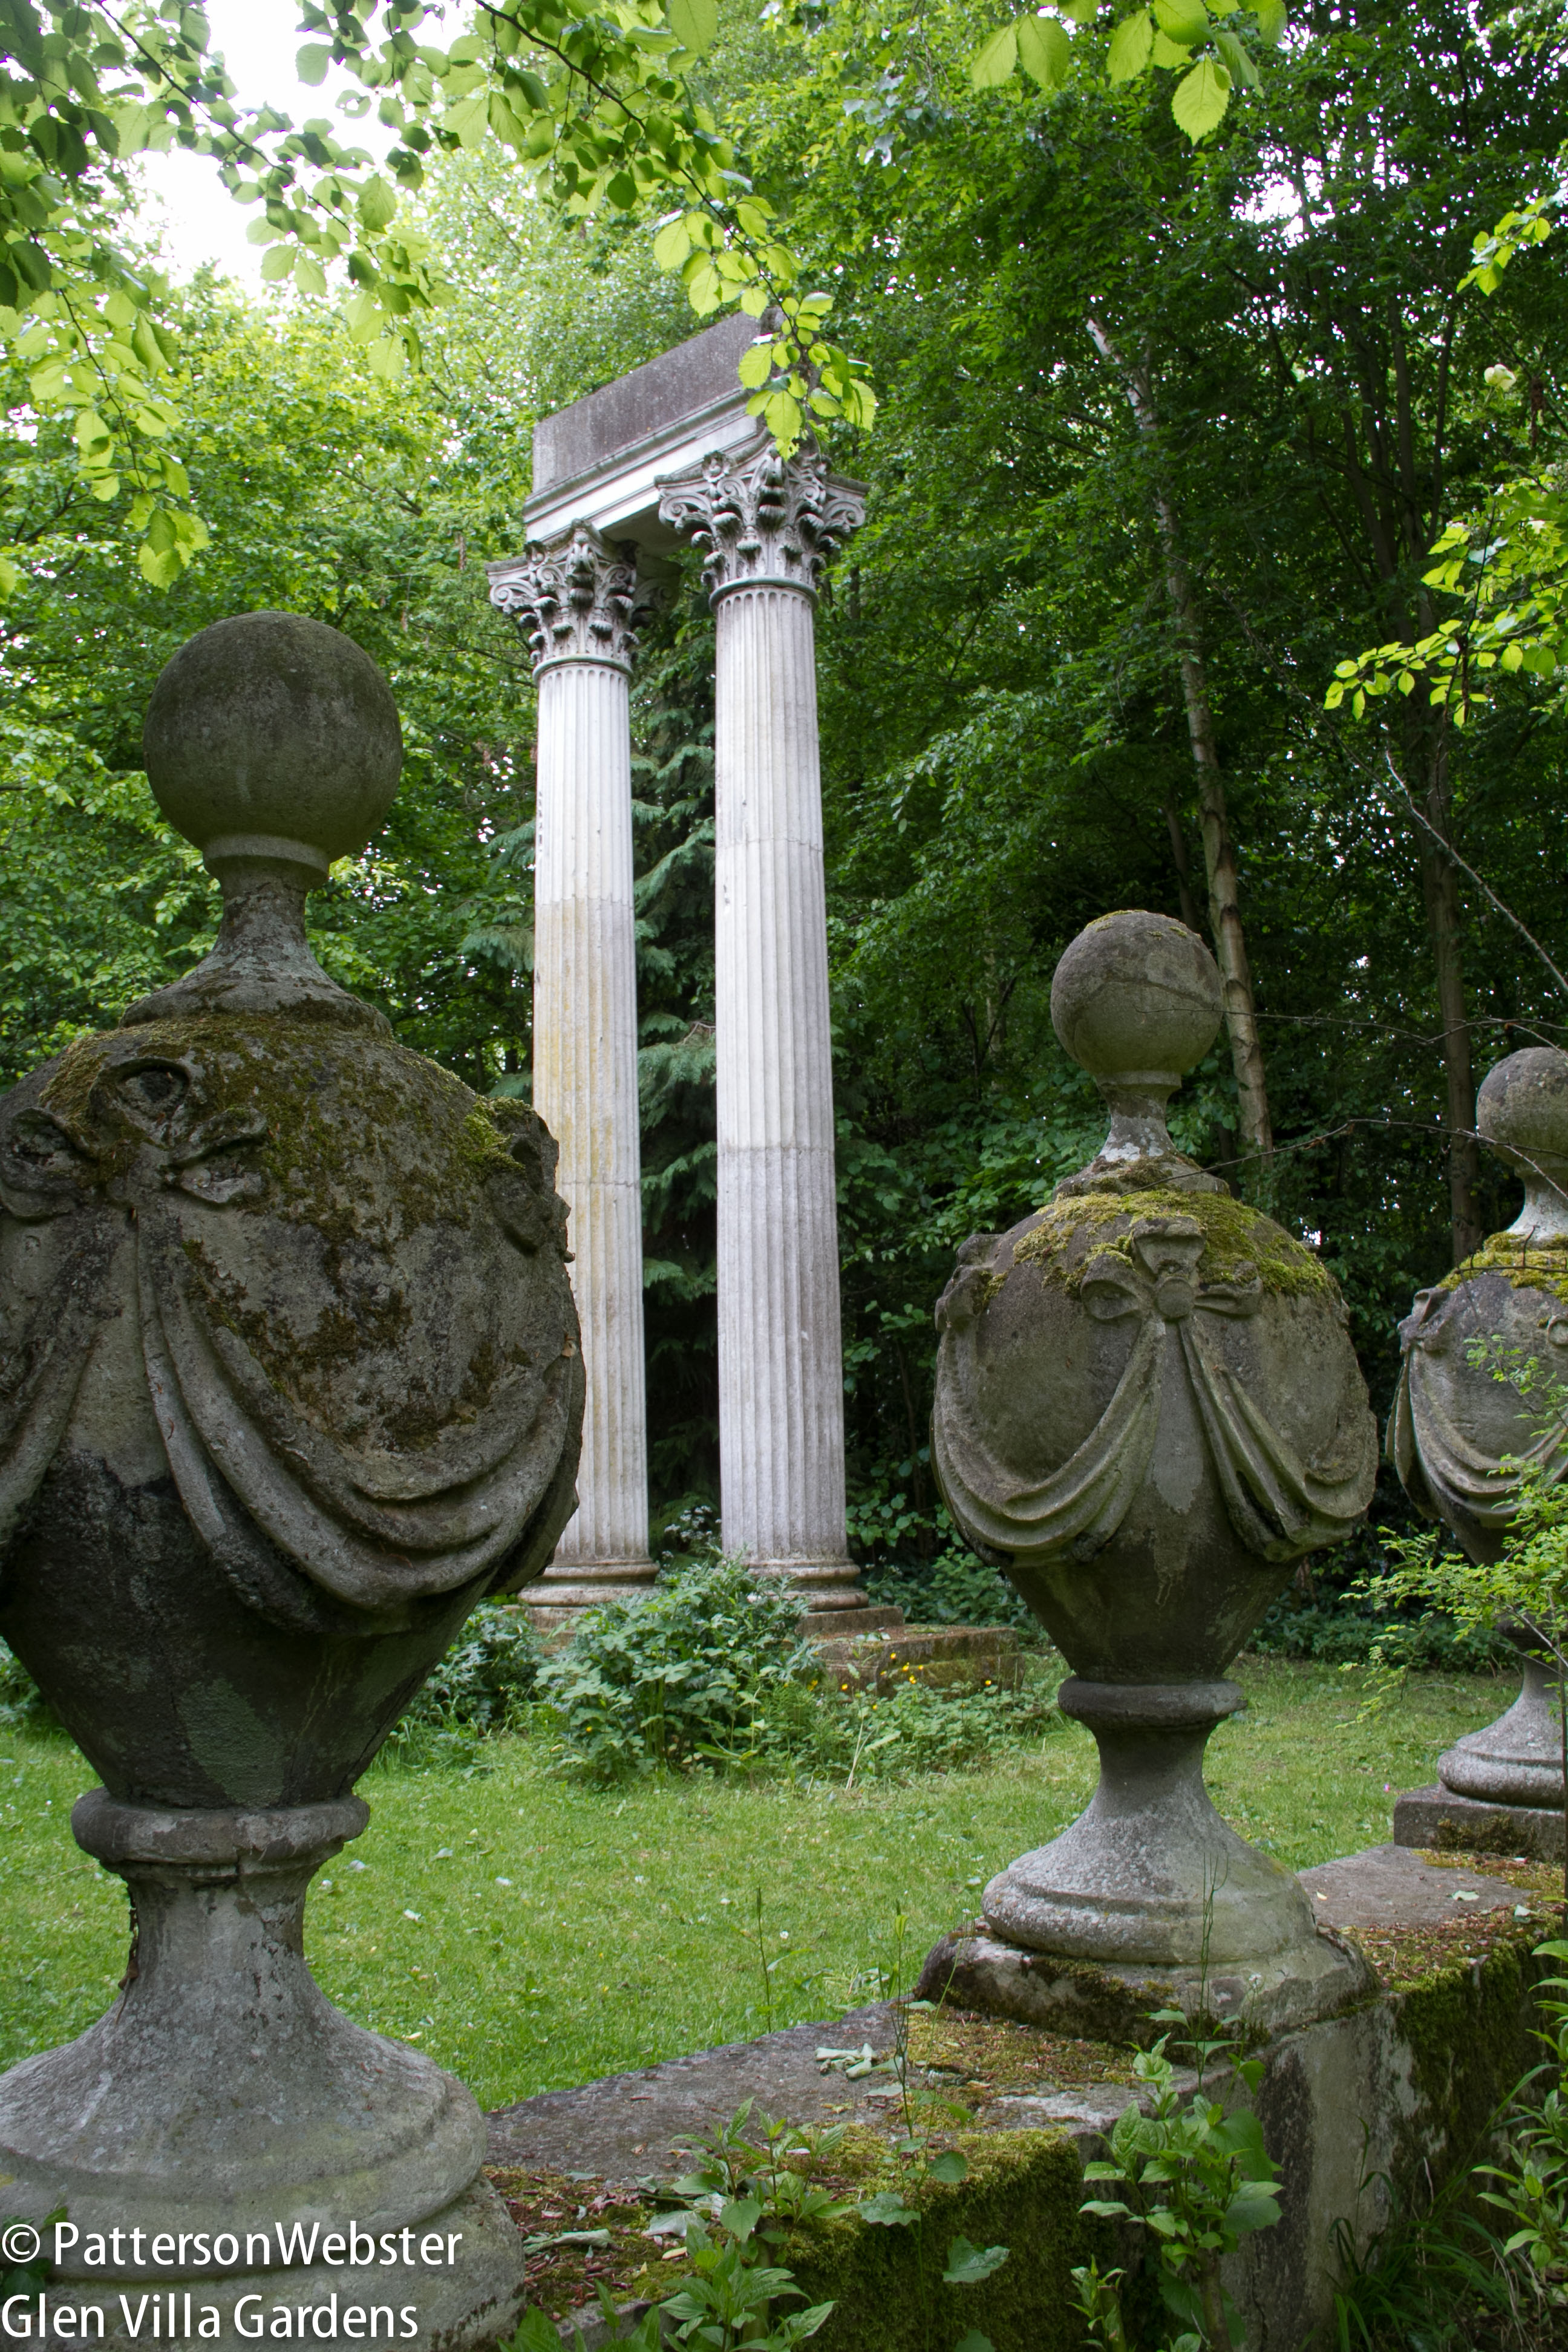 The urns also came from Coutts Bank.